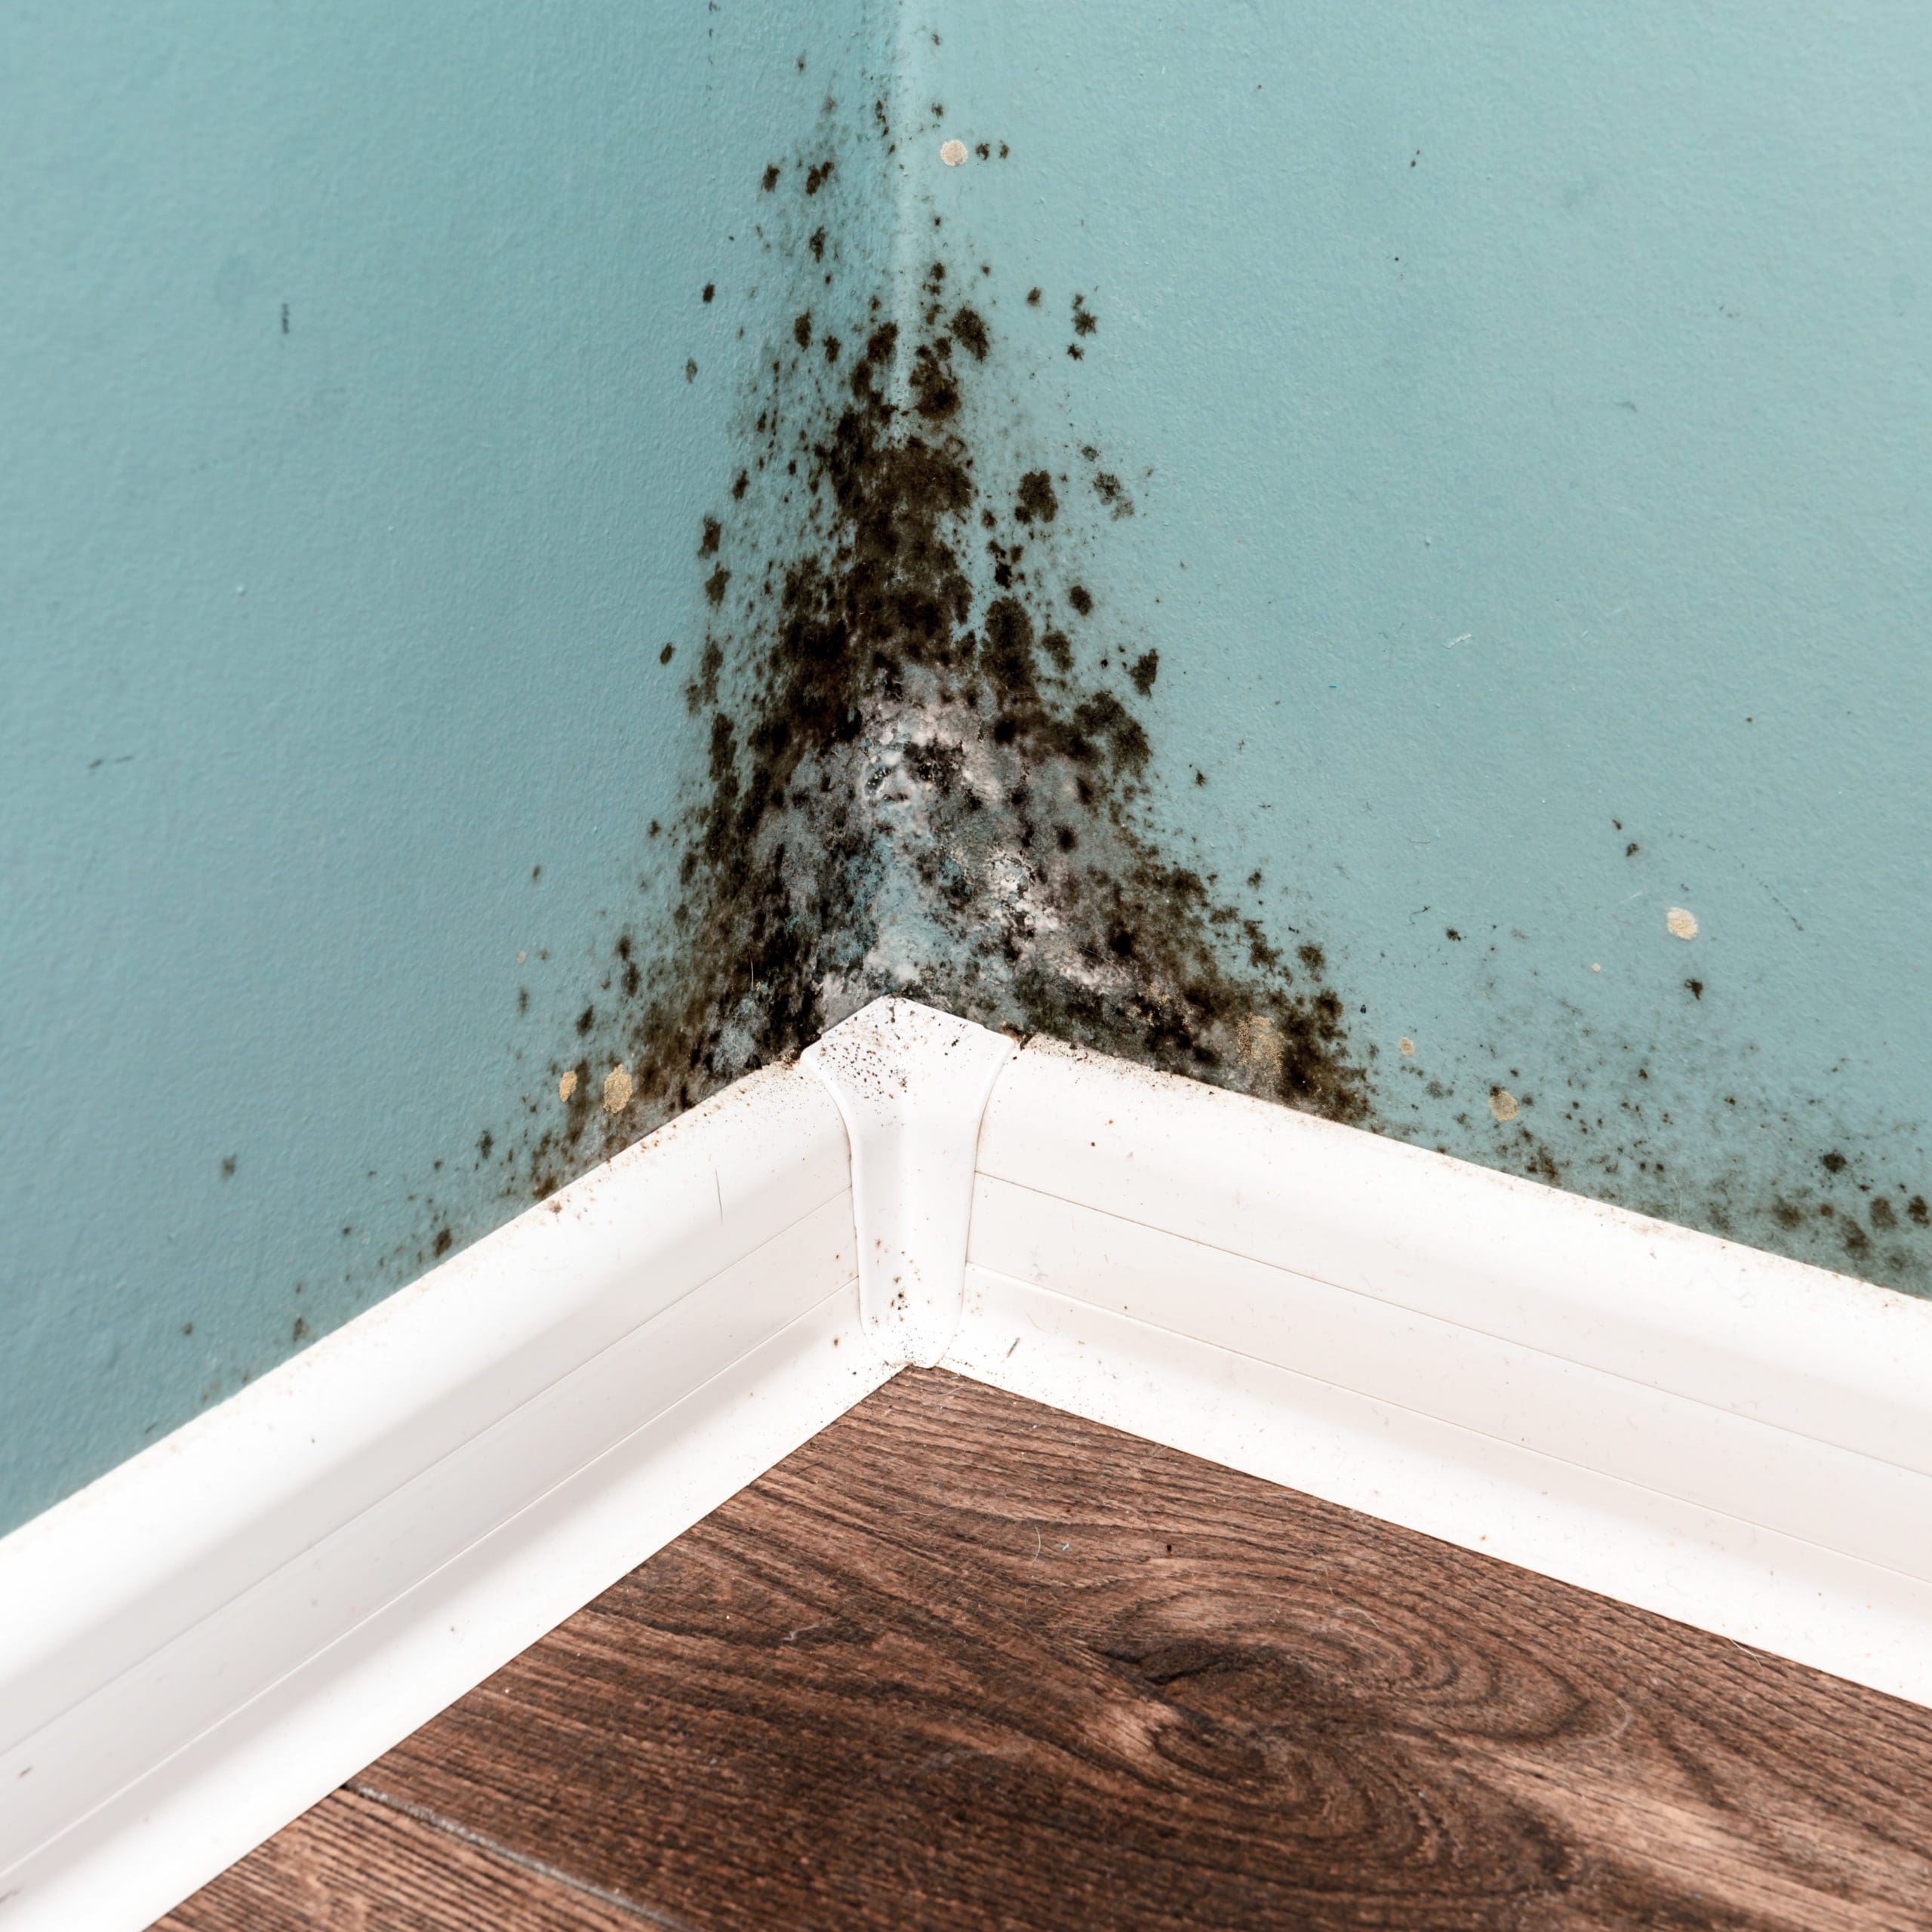 Should I Buy a House with Mold?